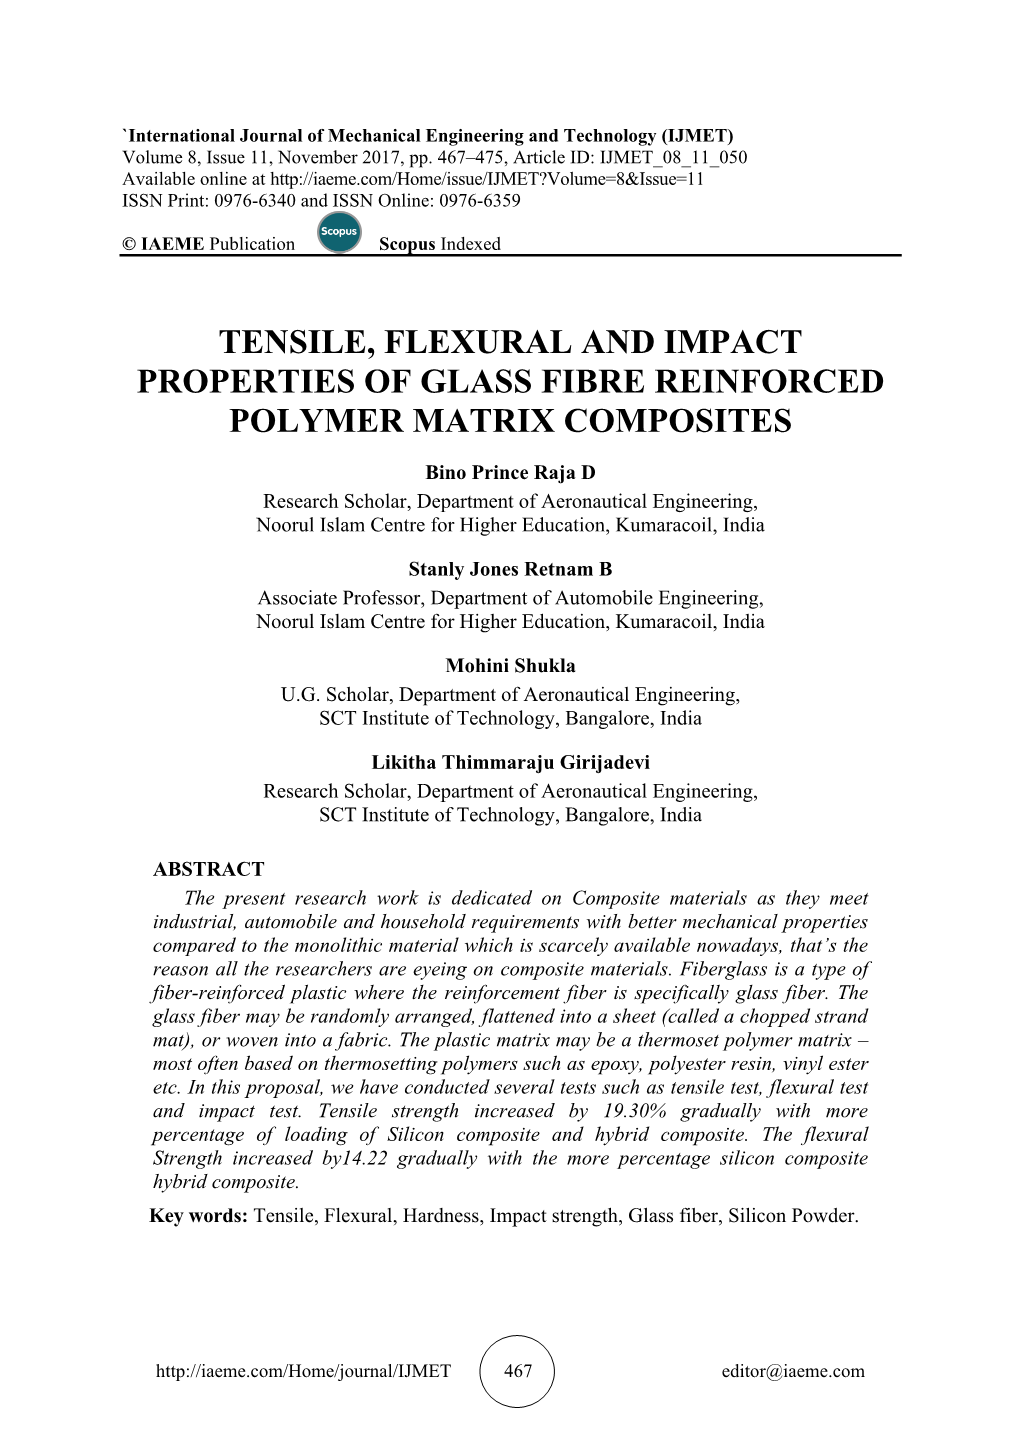 Tensile, Flexural and Impact Properties of Glass Fibre Reinforced Polymer Matrix Composites